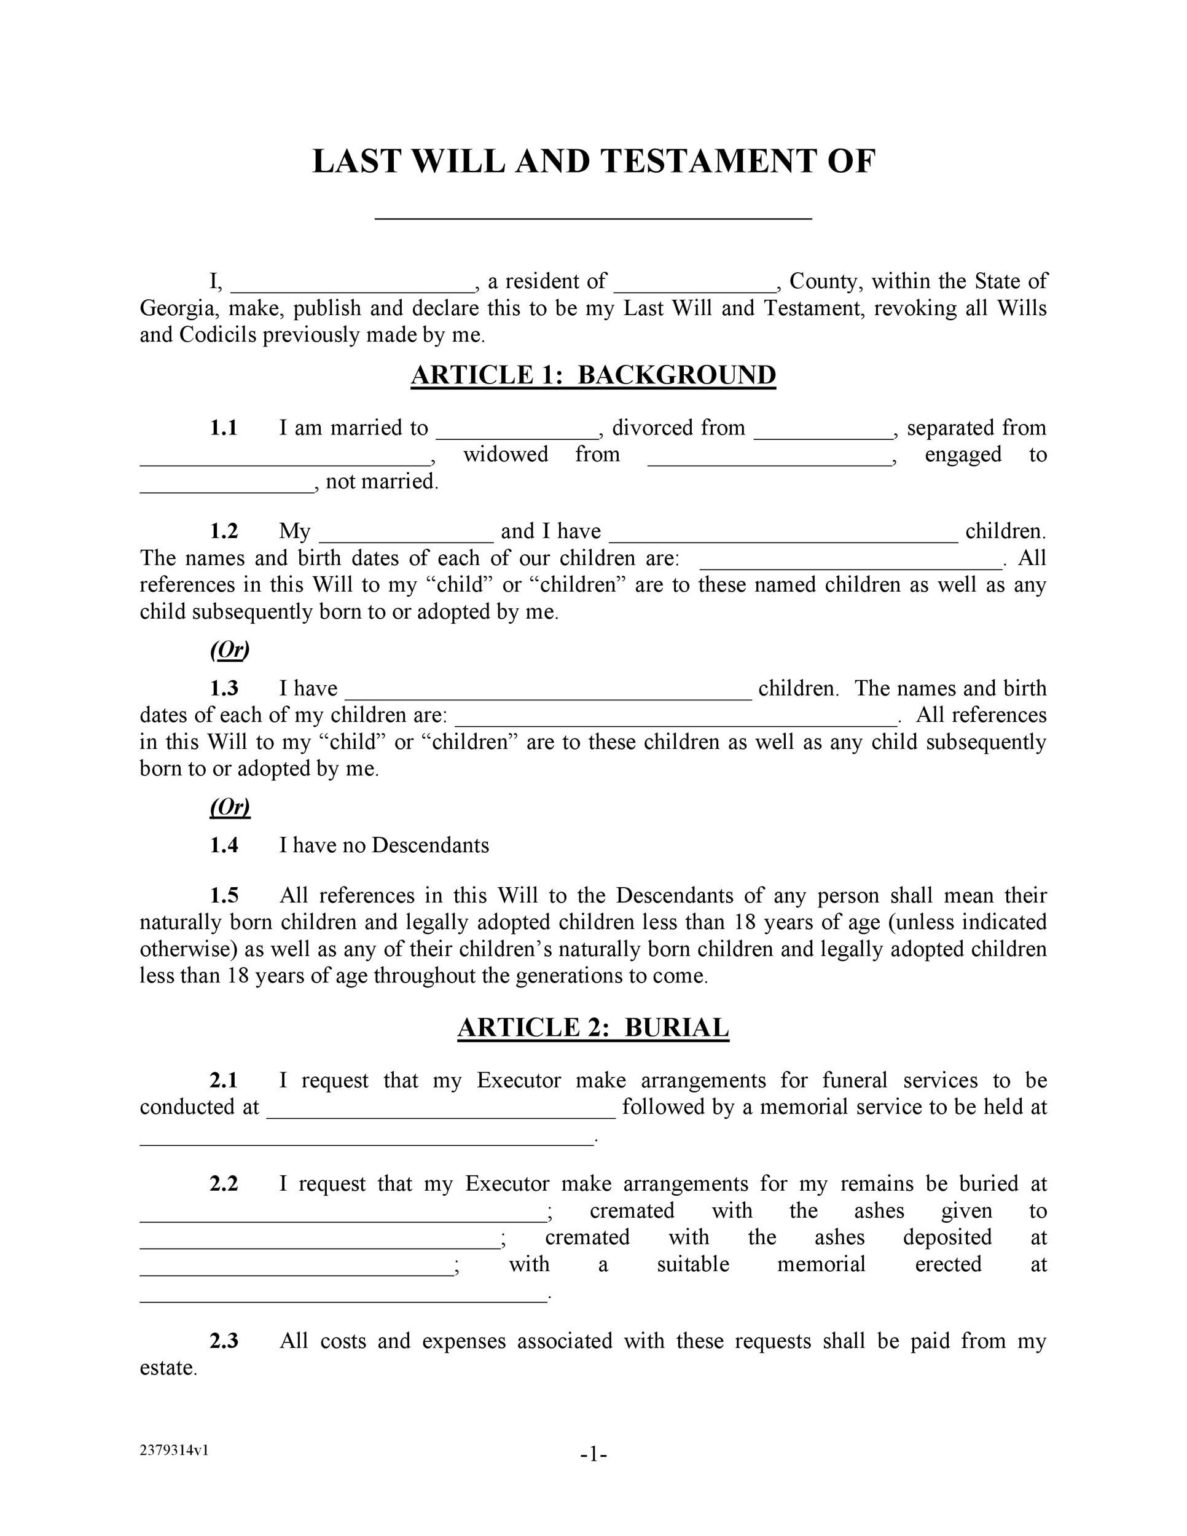 39-last-will-and-testament-forms-templates-templatelab-living-will-forms-free-printable